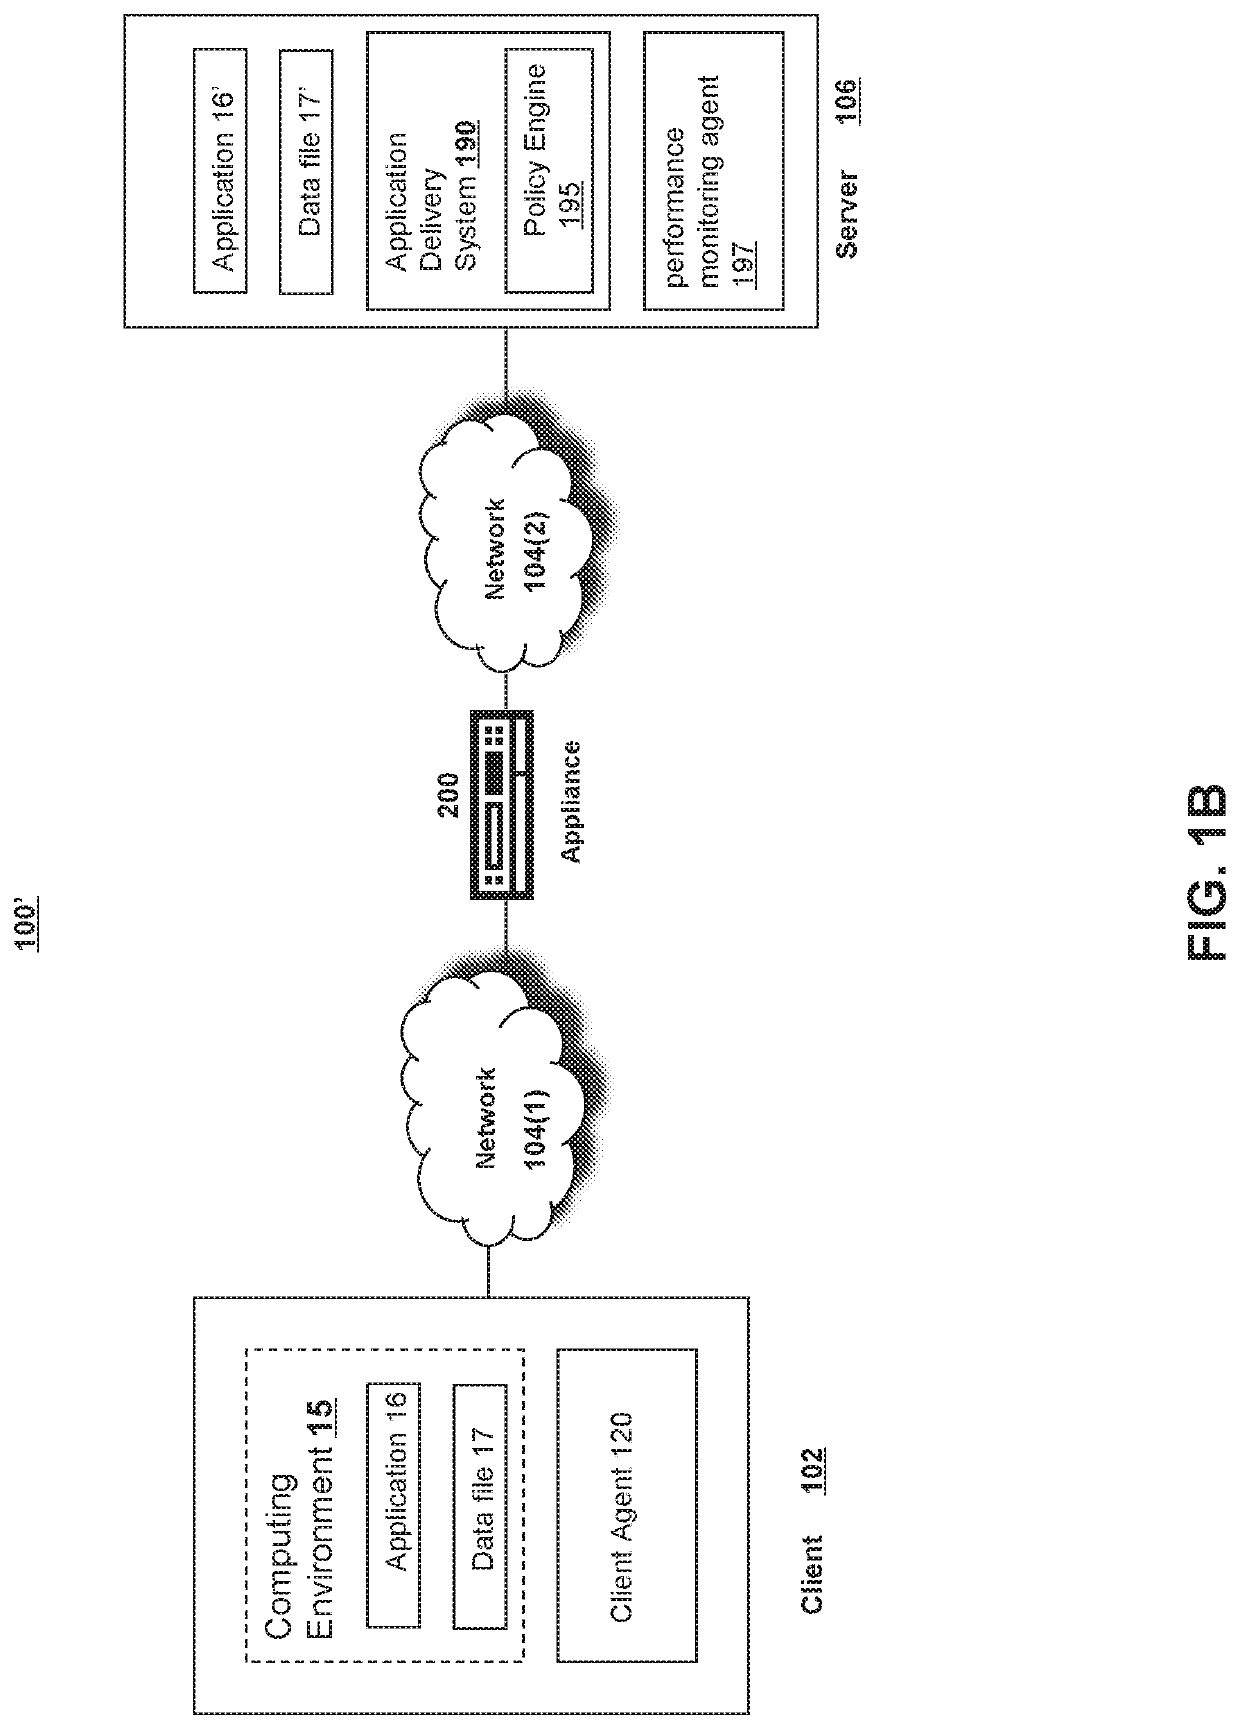 Method for securing the rendezvous connection in a cloud service using routing tokens